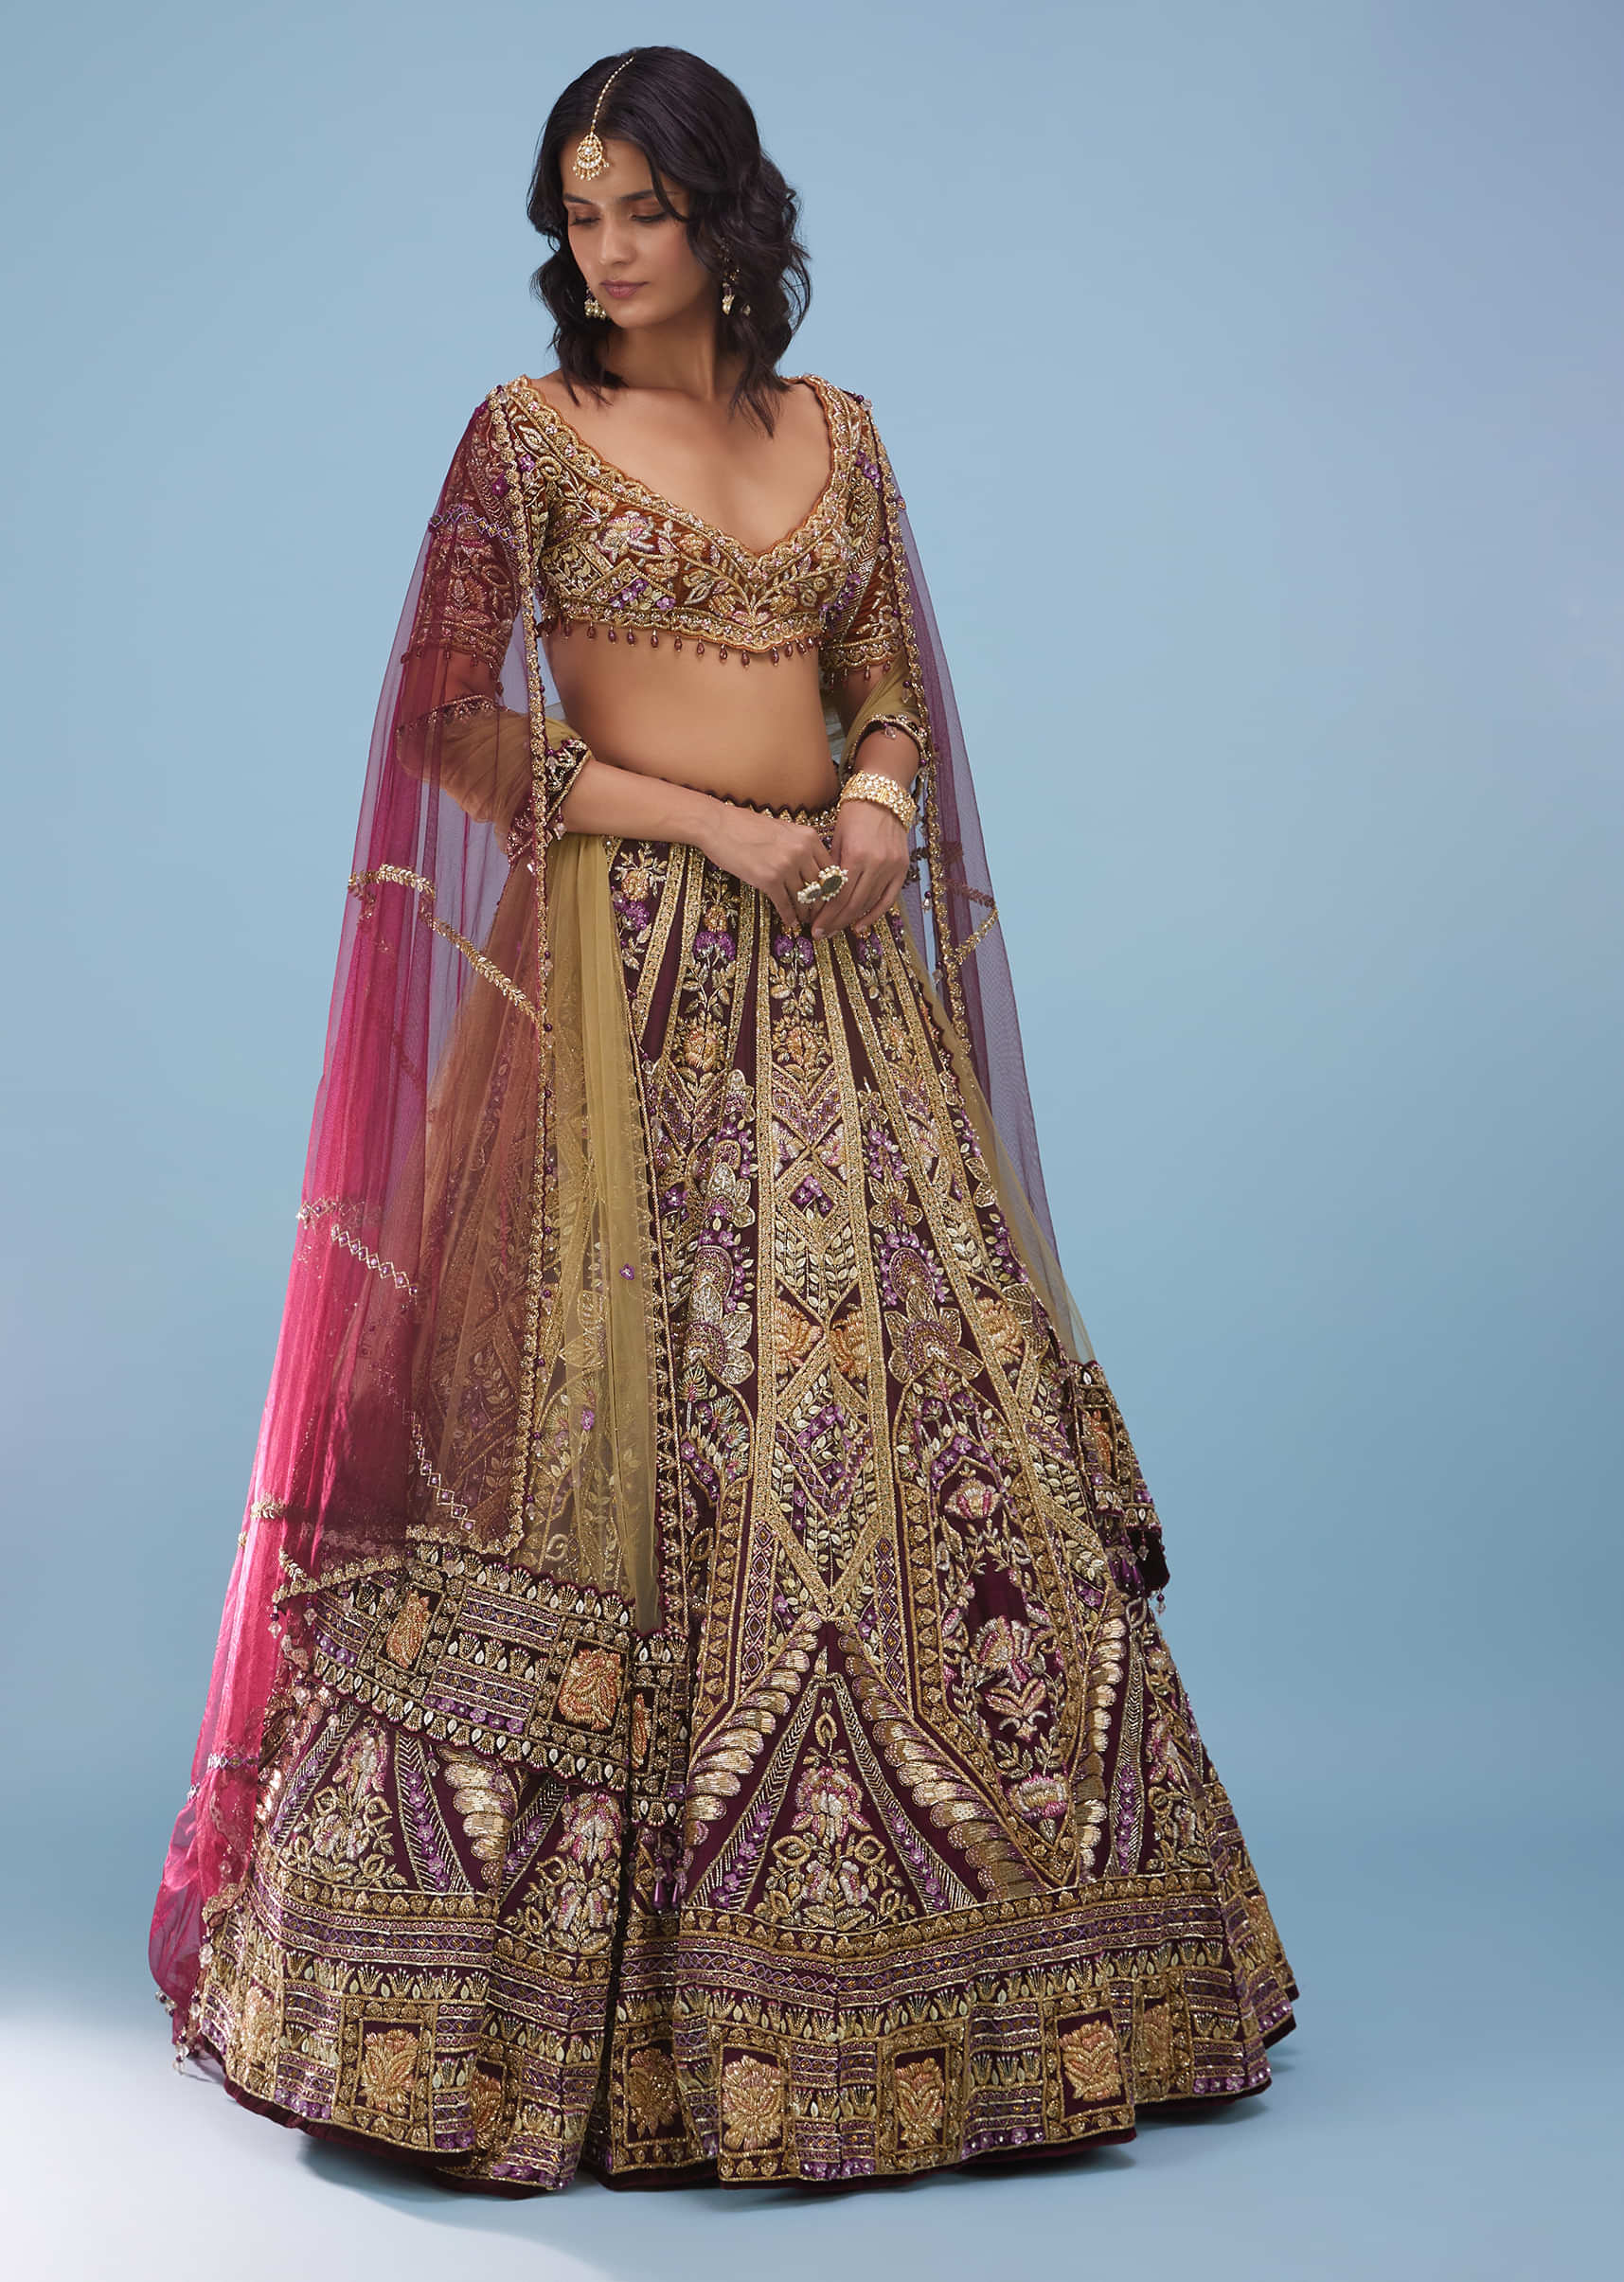 Wine Red Queenly Bridal Lehenga In Velvet With Heavy Floral Embroidery - NOOR 2022